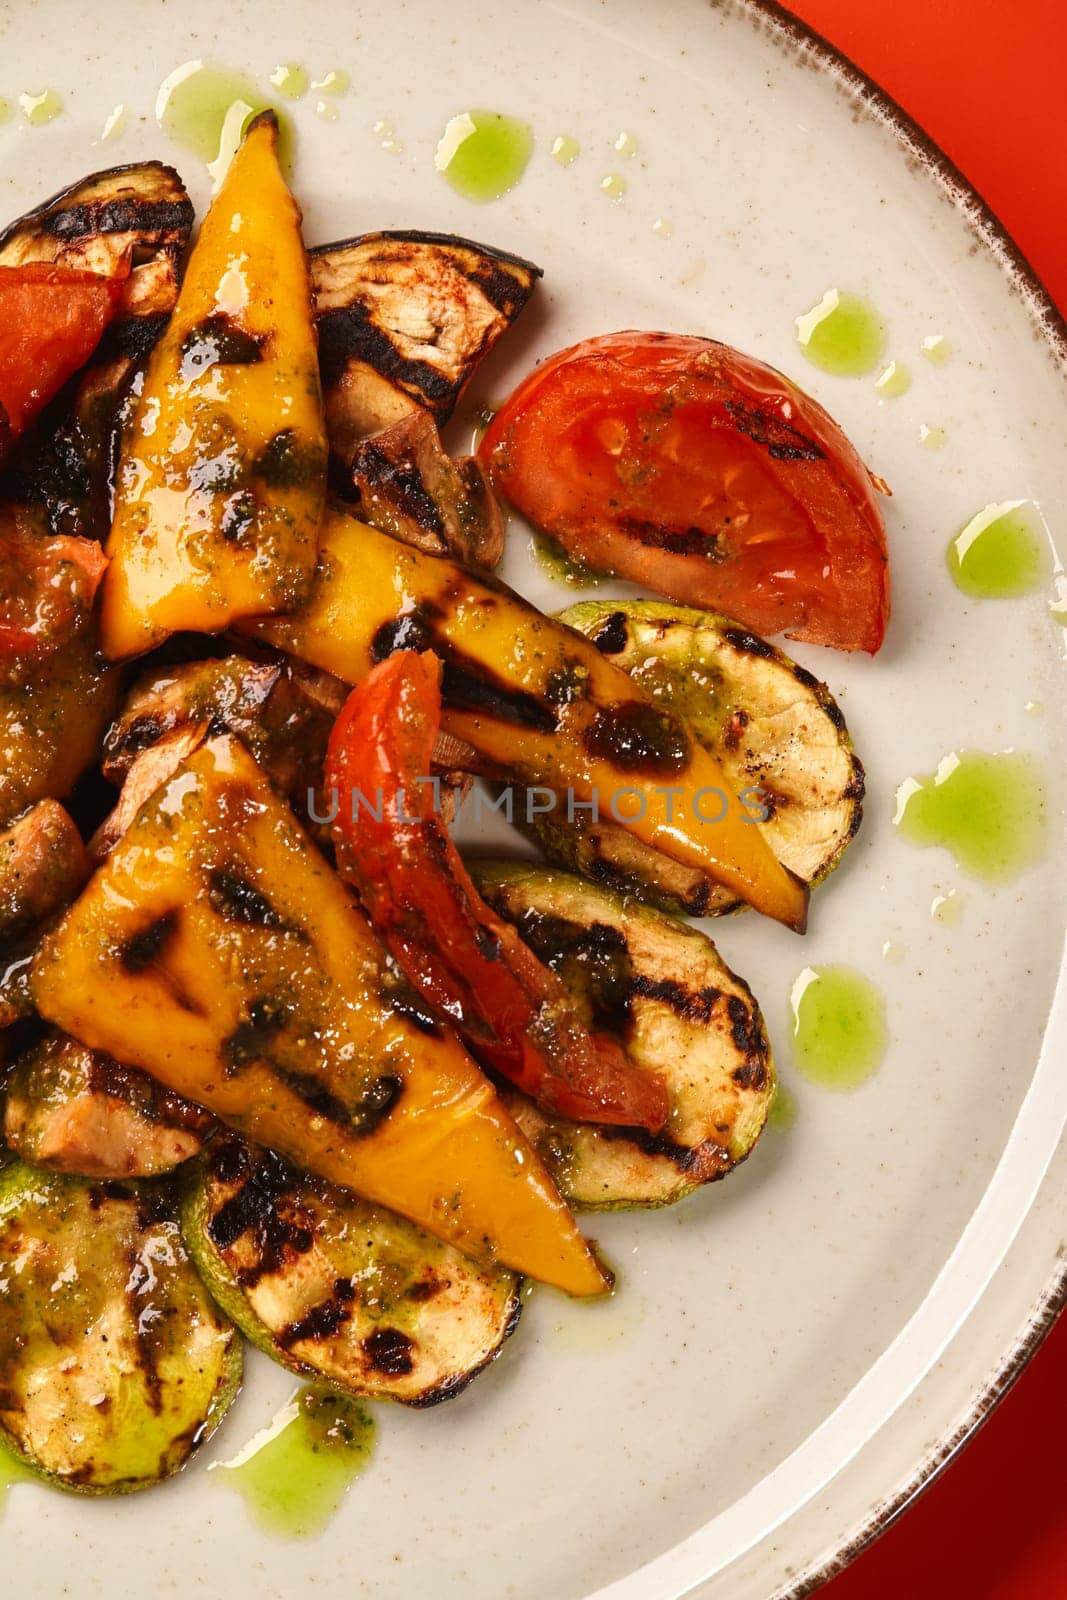 Closeup view of slices of browned grilled zucchini, eggplant, bell pepper, tomato and mushrooms drizzled with spicy herb oil, served on ceramic plate against red background